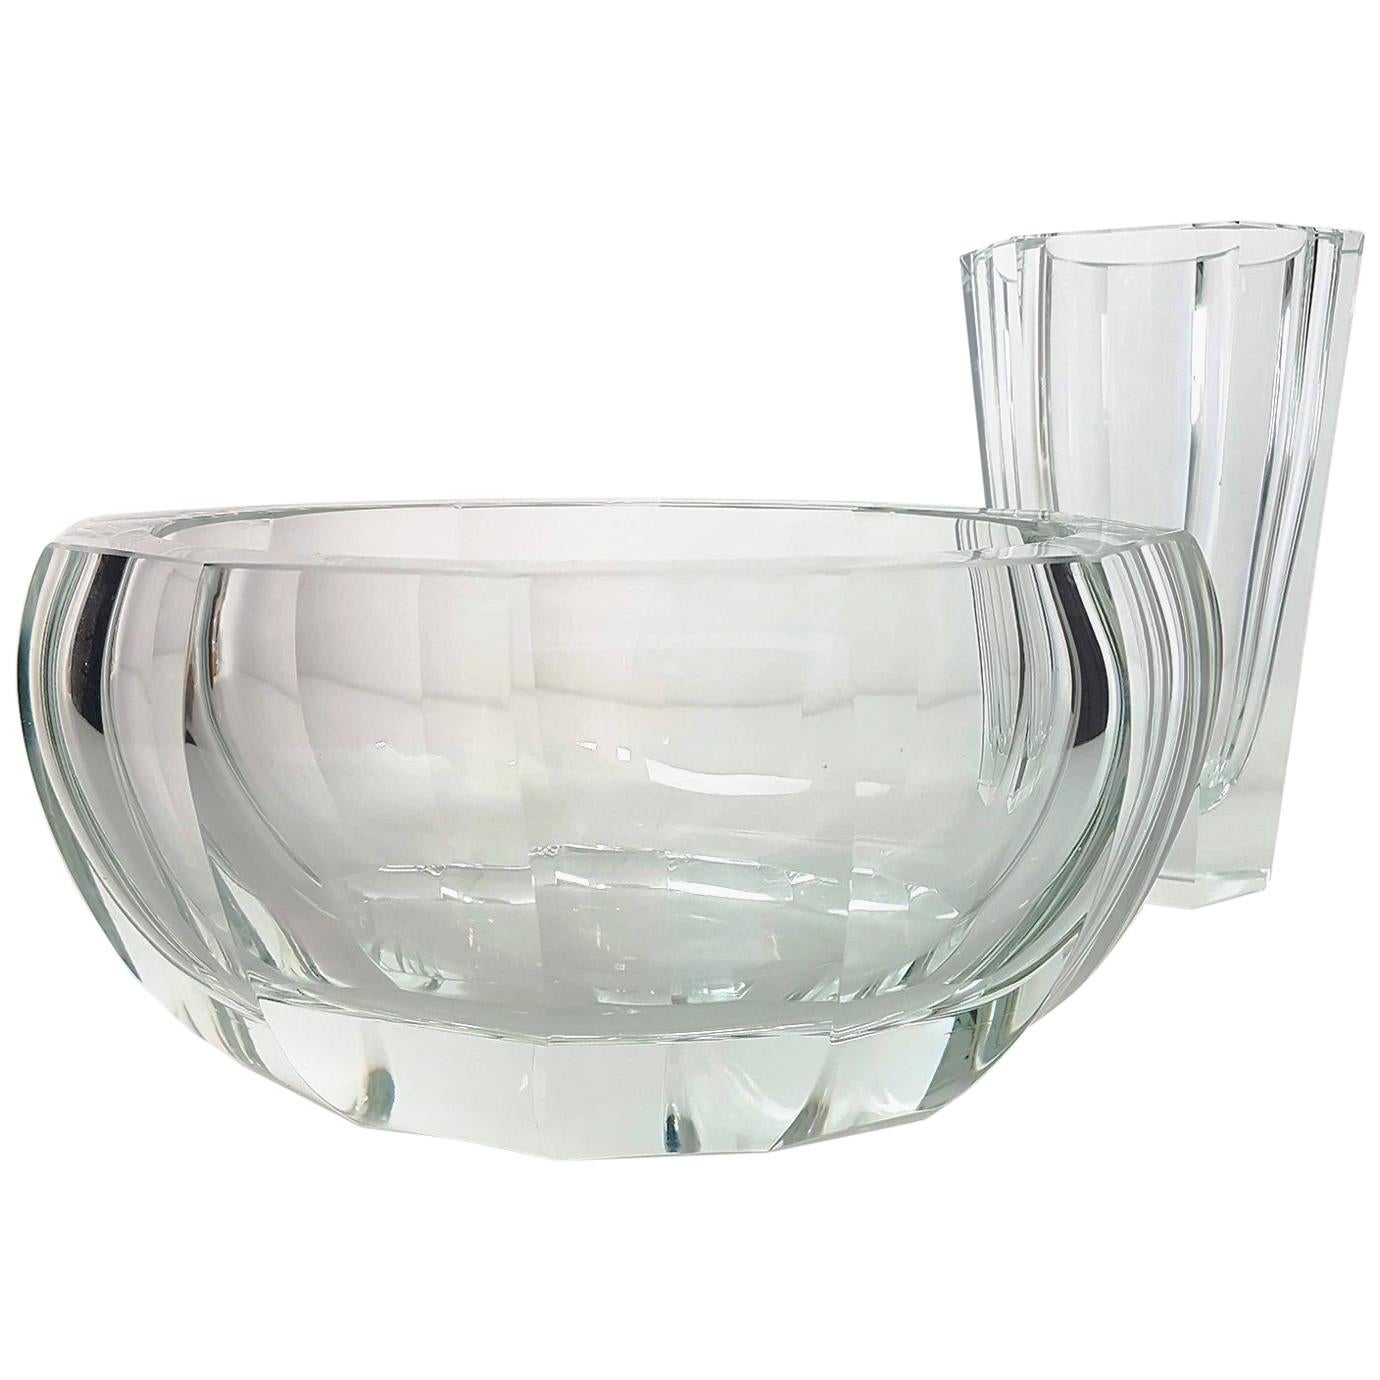 This imposing clear set ‘vase and bowl’ by Leo Moser is panel cut by hand. This unusual shape is balanced and imposing. A Classic shape defined by several bold edges rising up from a prominent base.

Perfect for formal and casual